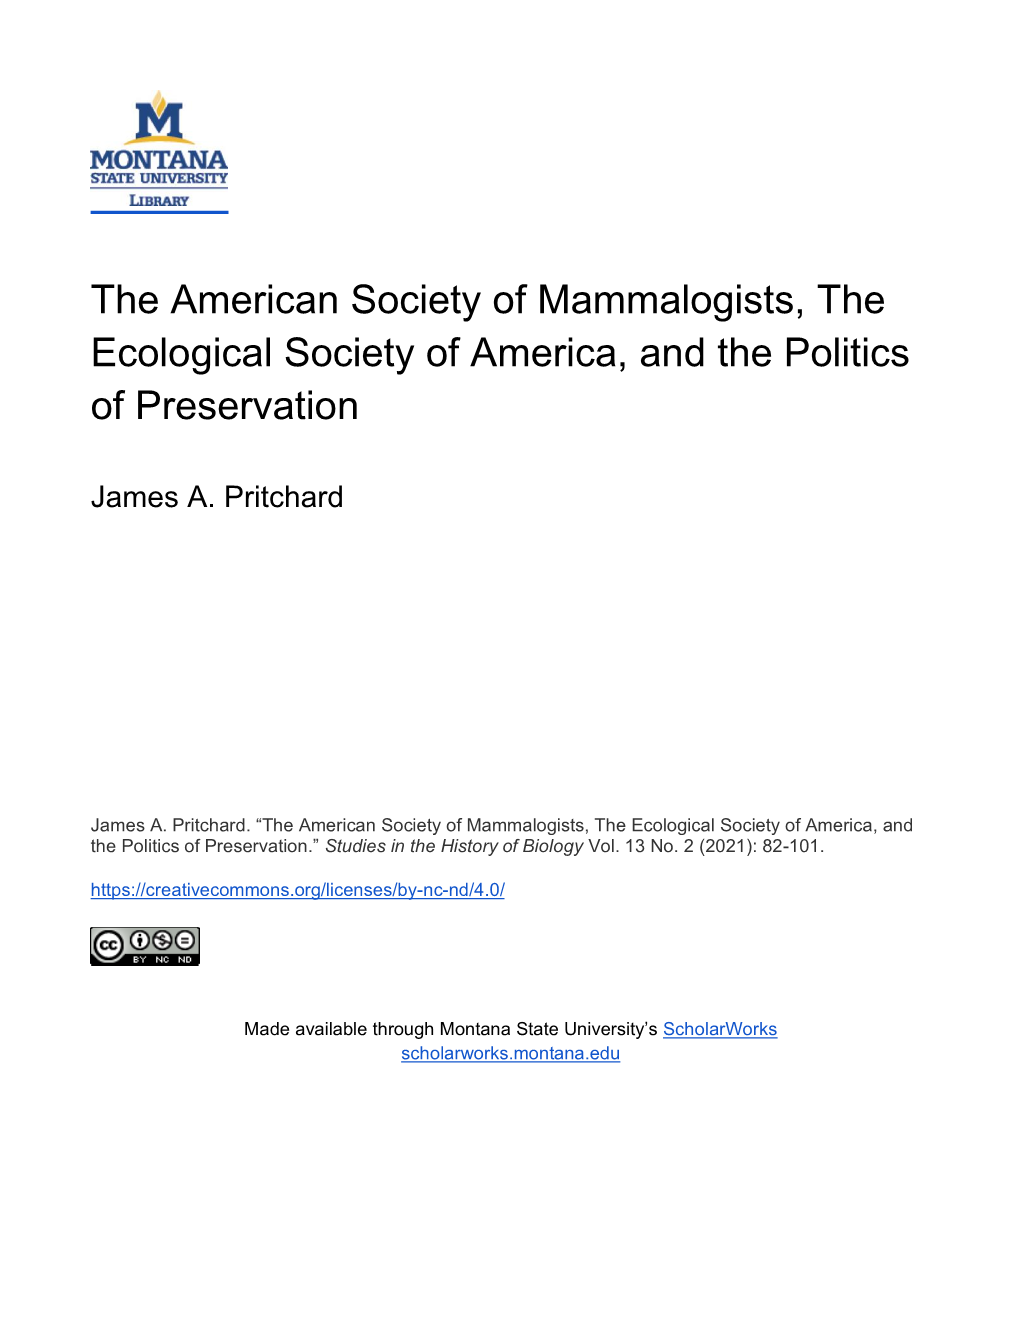 The American Society for Mammalogy, the Ecological Society